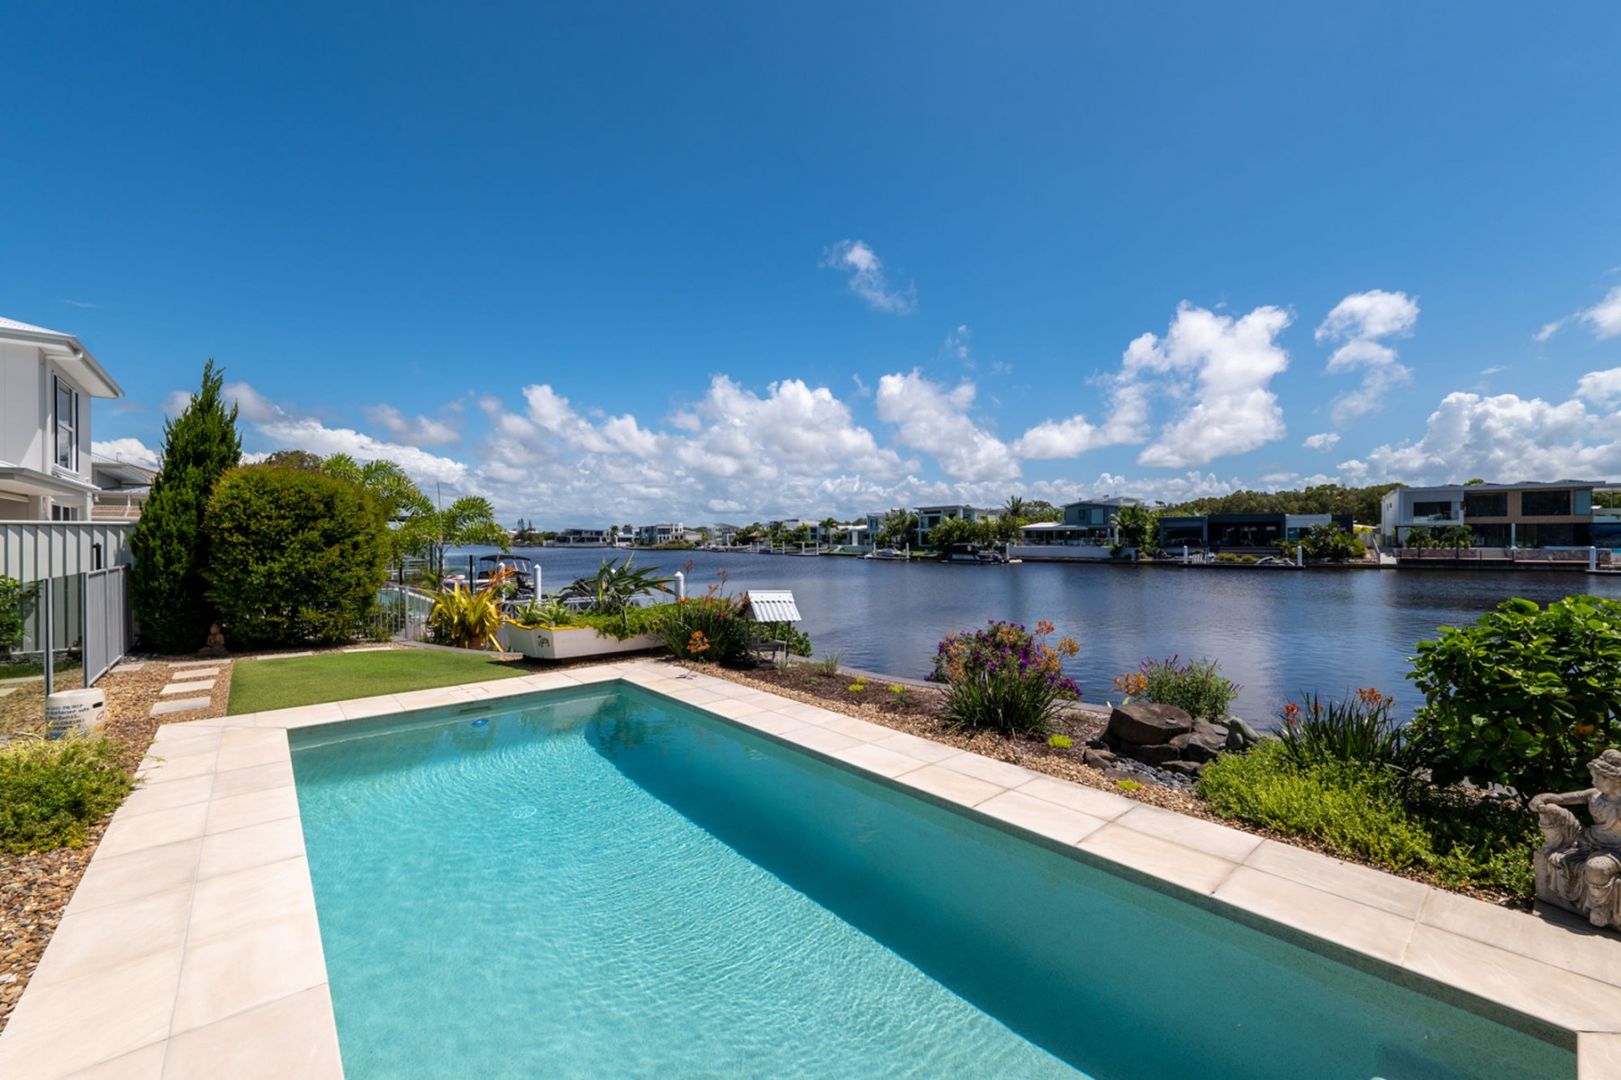 38 Marmont Street, Pelican Waters QLD 4551, Image 1